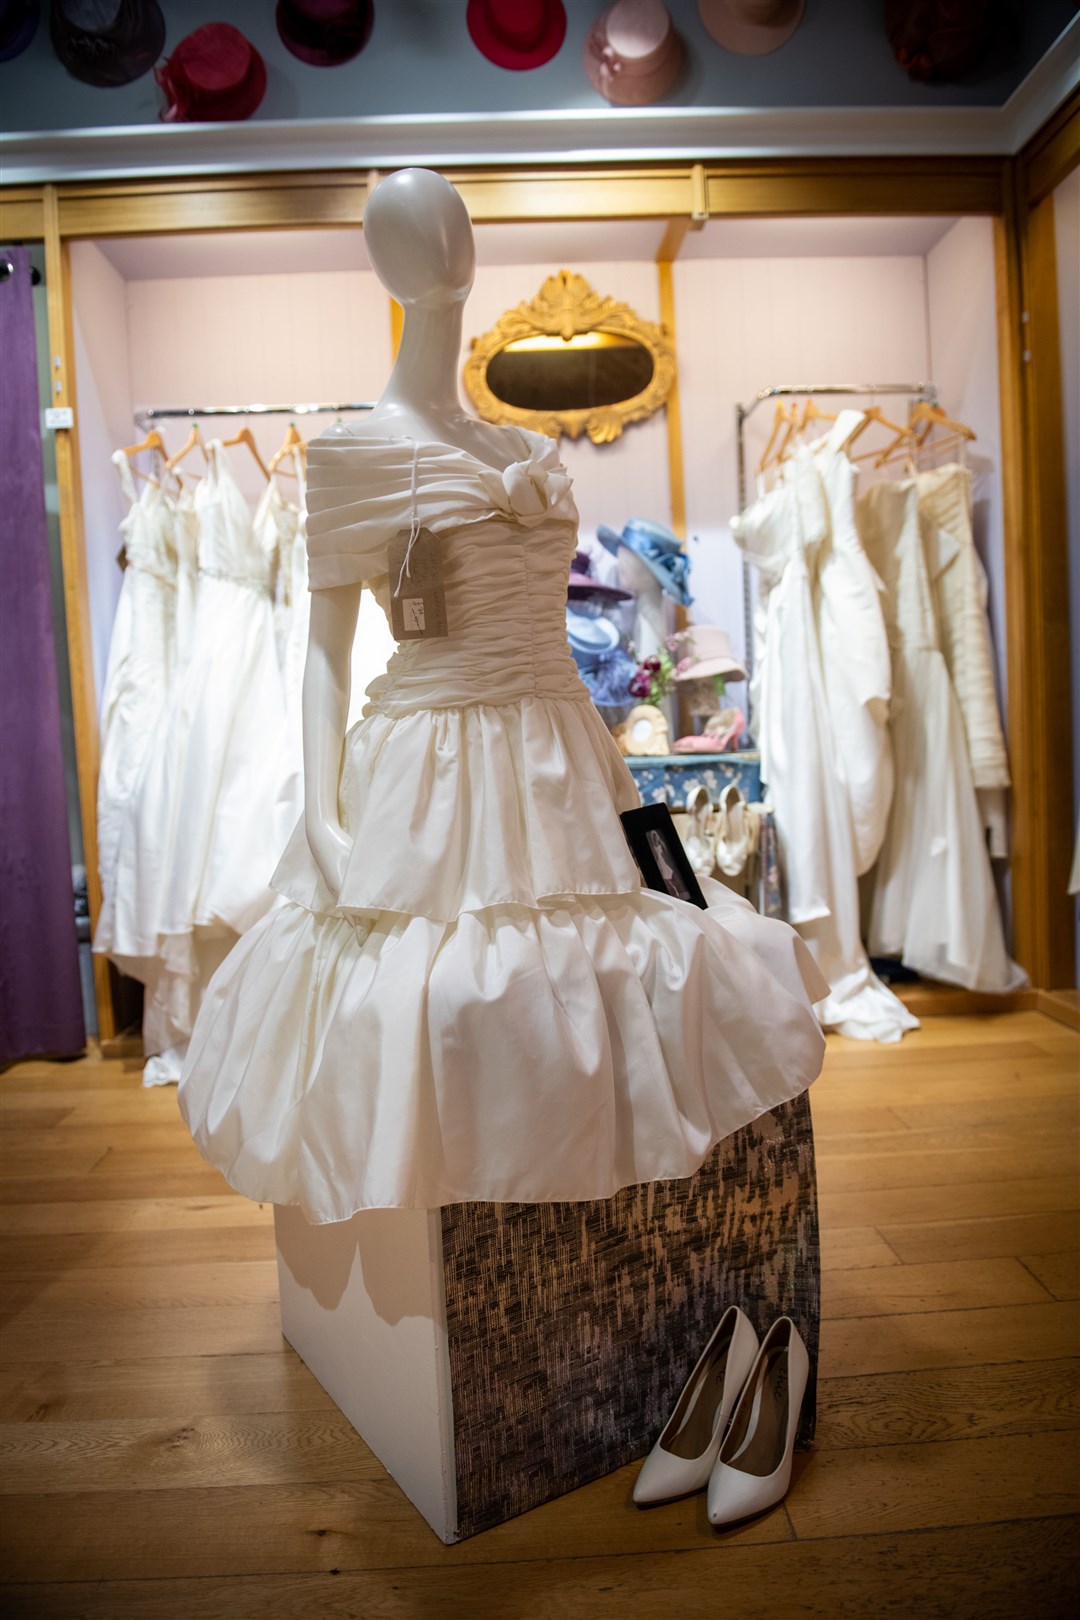 A wide selection of dresses are on display. Picture: Callum Mackay.